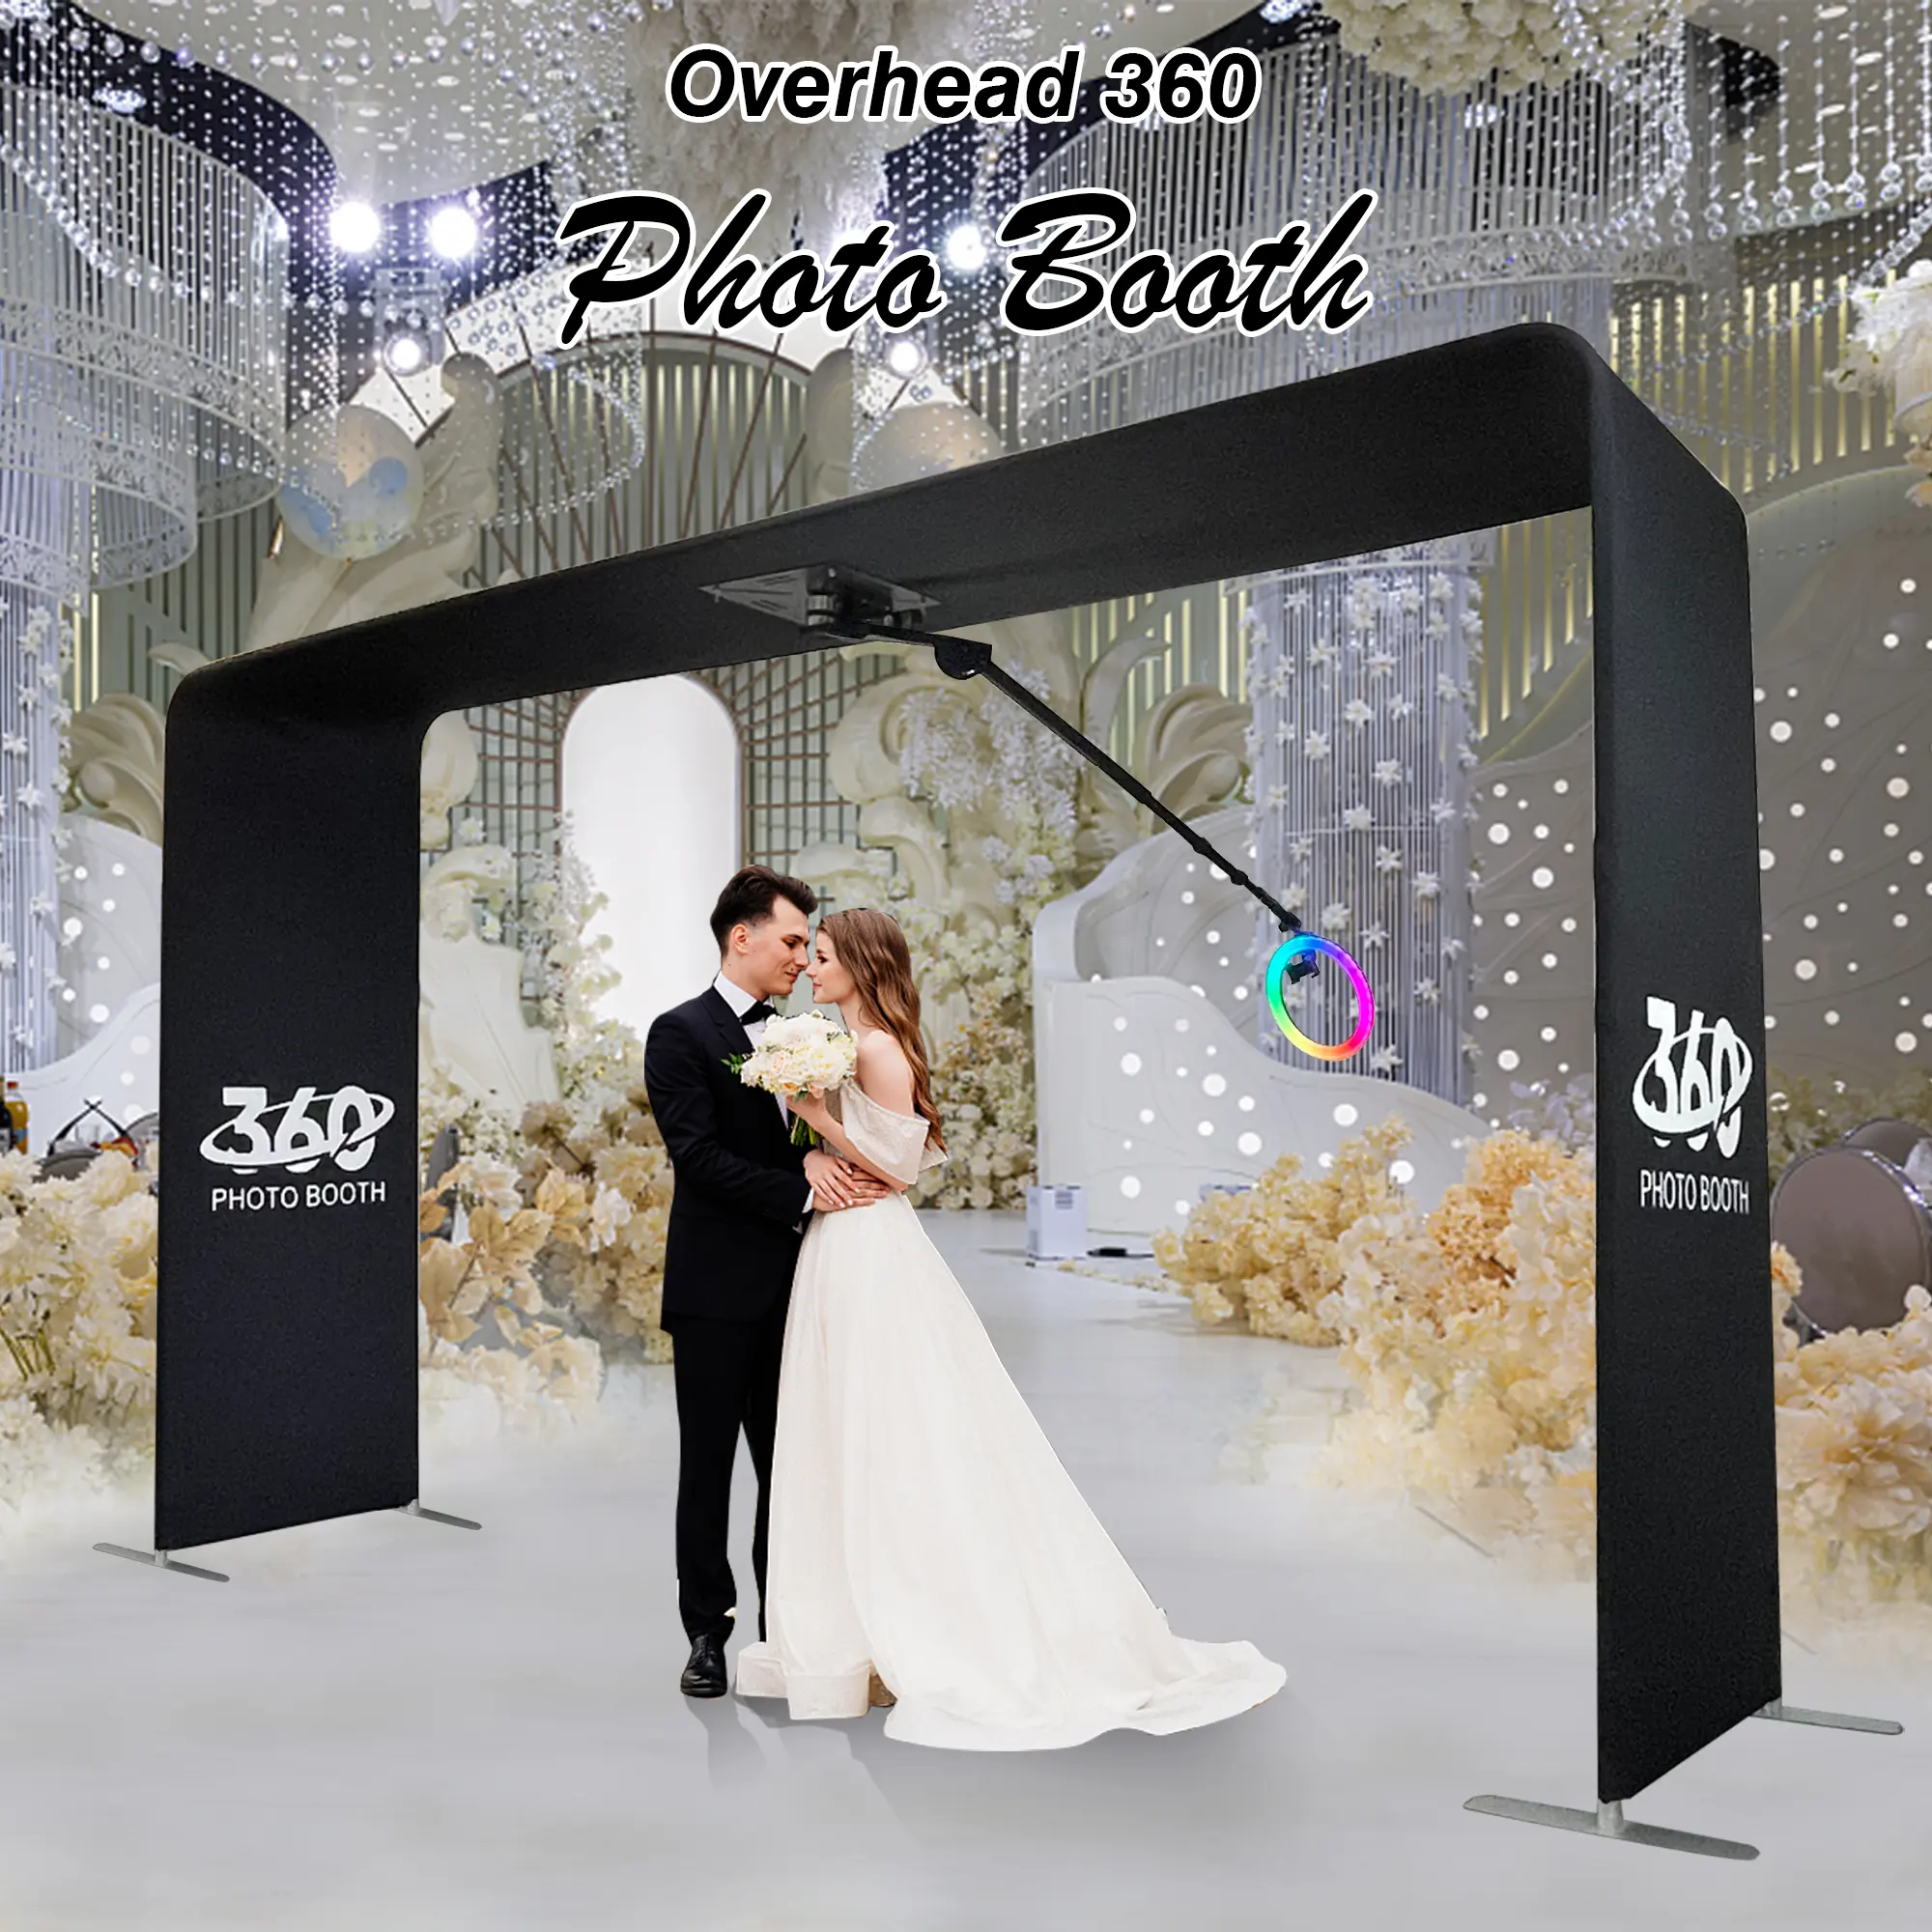 wholesale party spinner top 360 overhead photo booth photobooth over head 360 selfie photo booth sky 360 photo booth